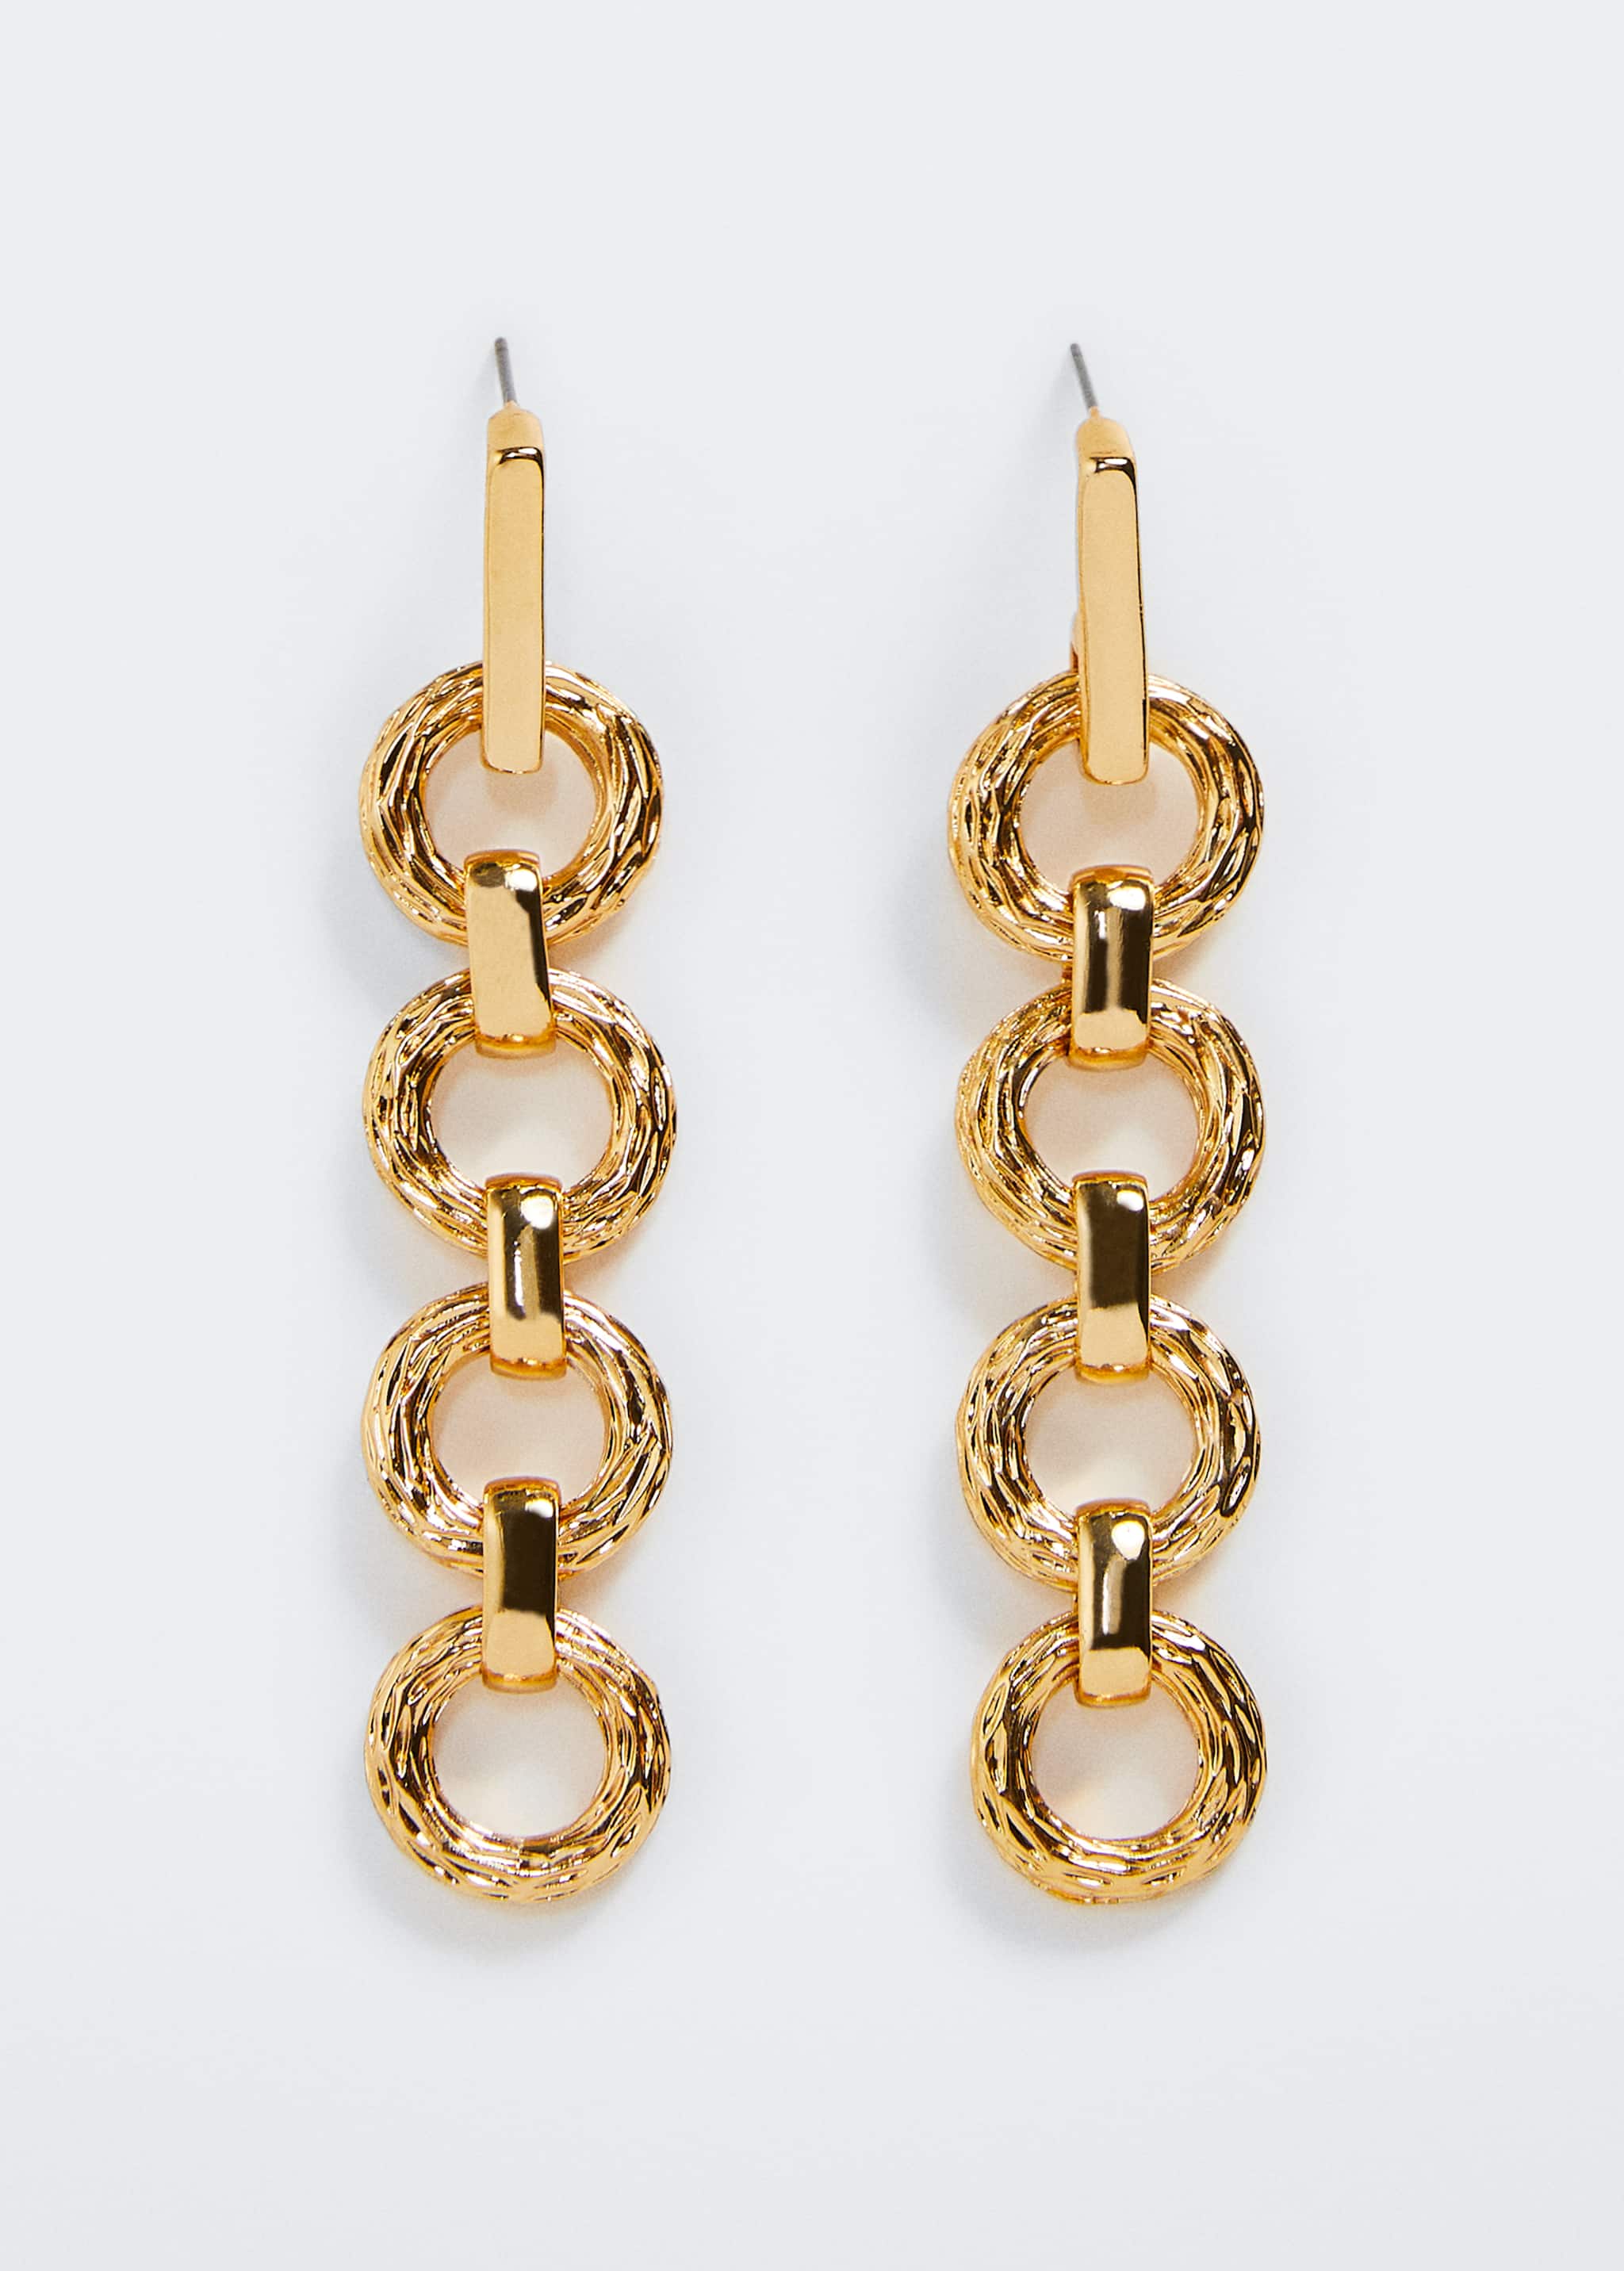 Chain pendant earrings - Article without model